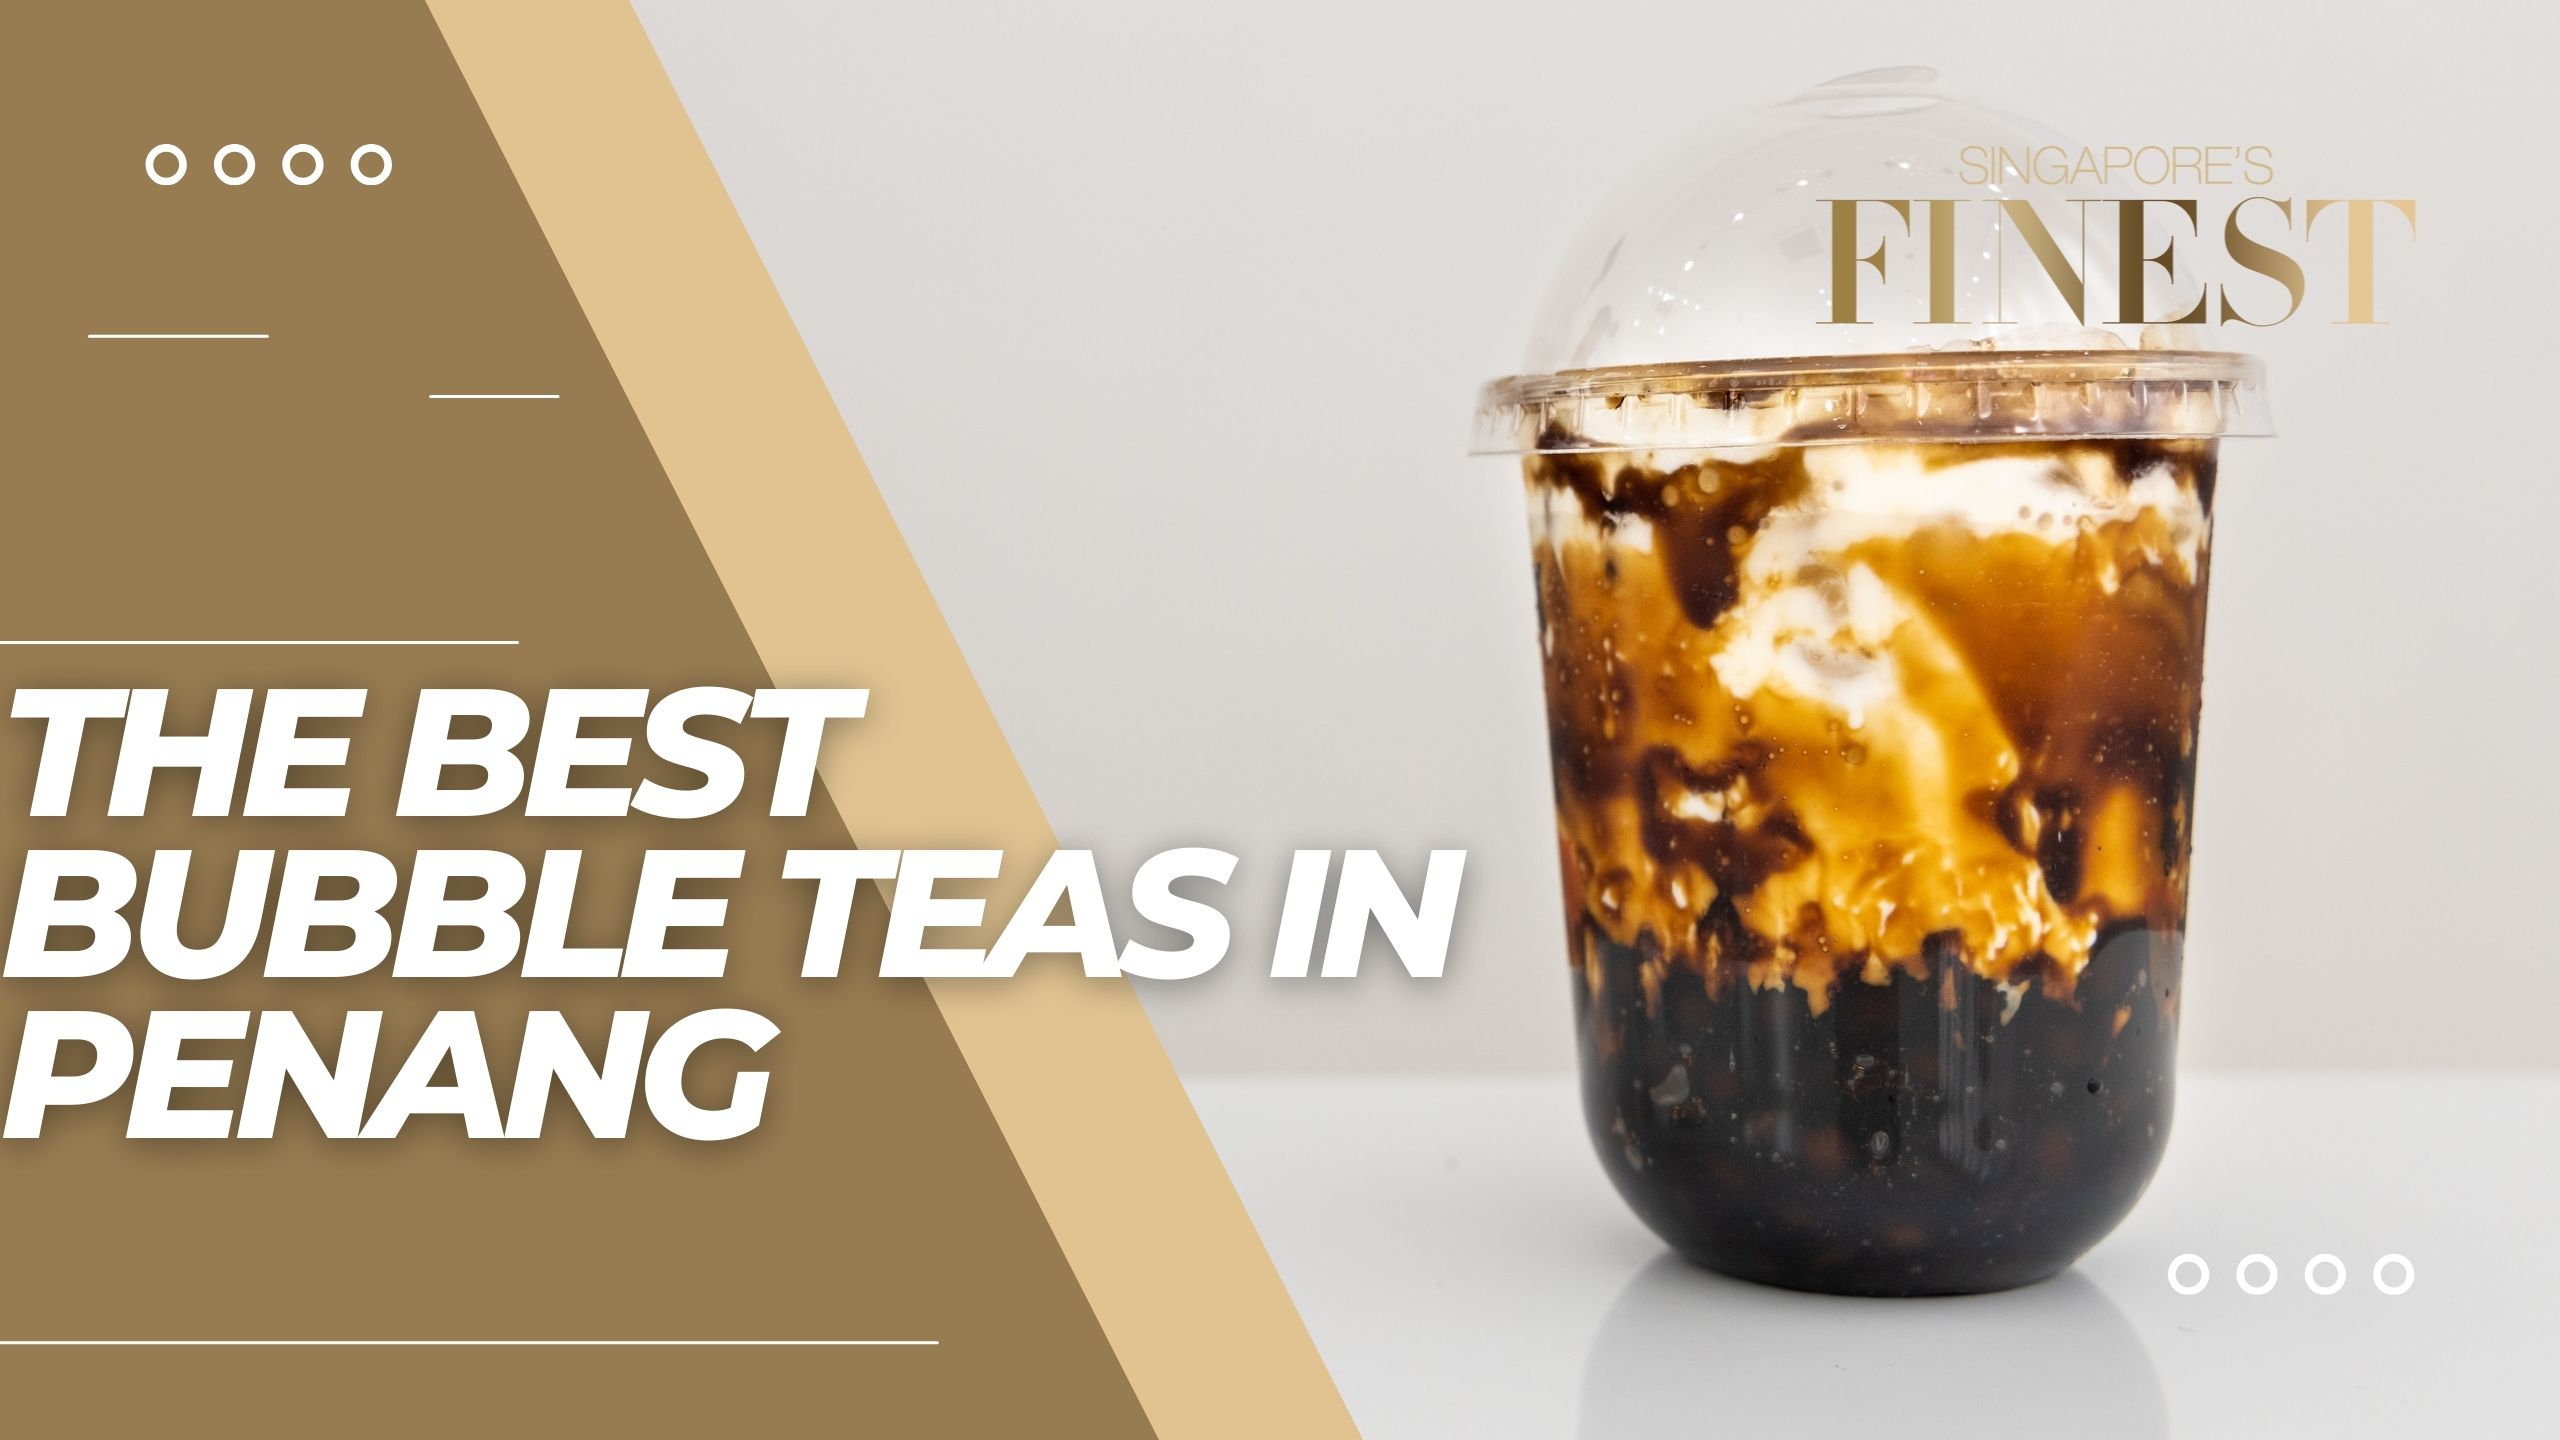 The Finest Bubble Teas in Penang